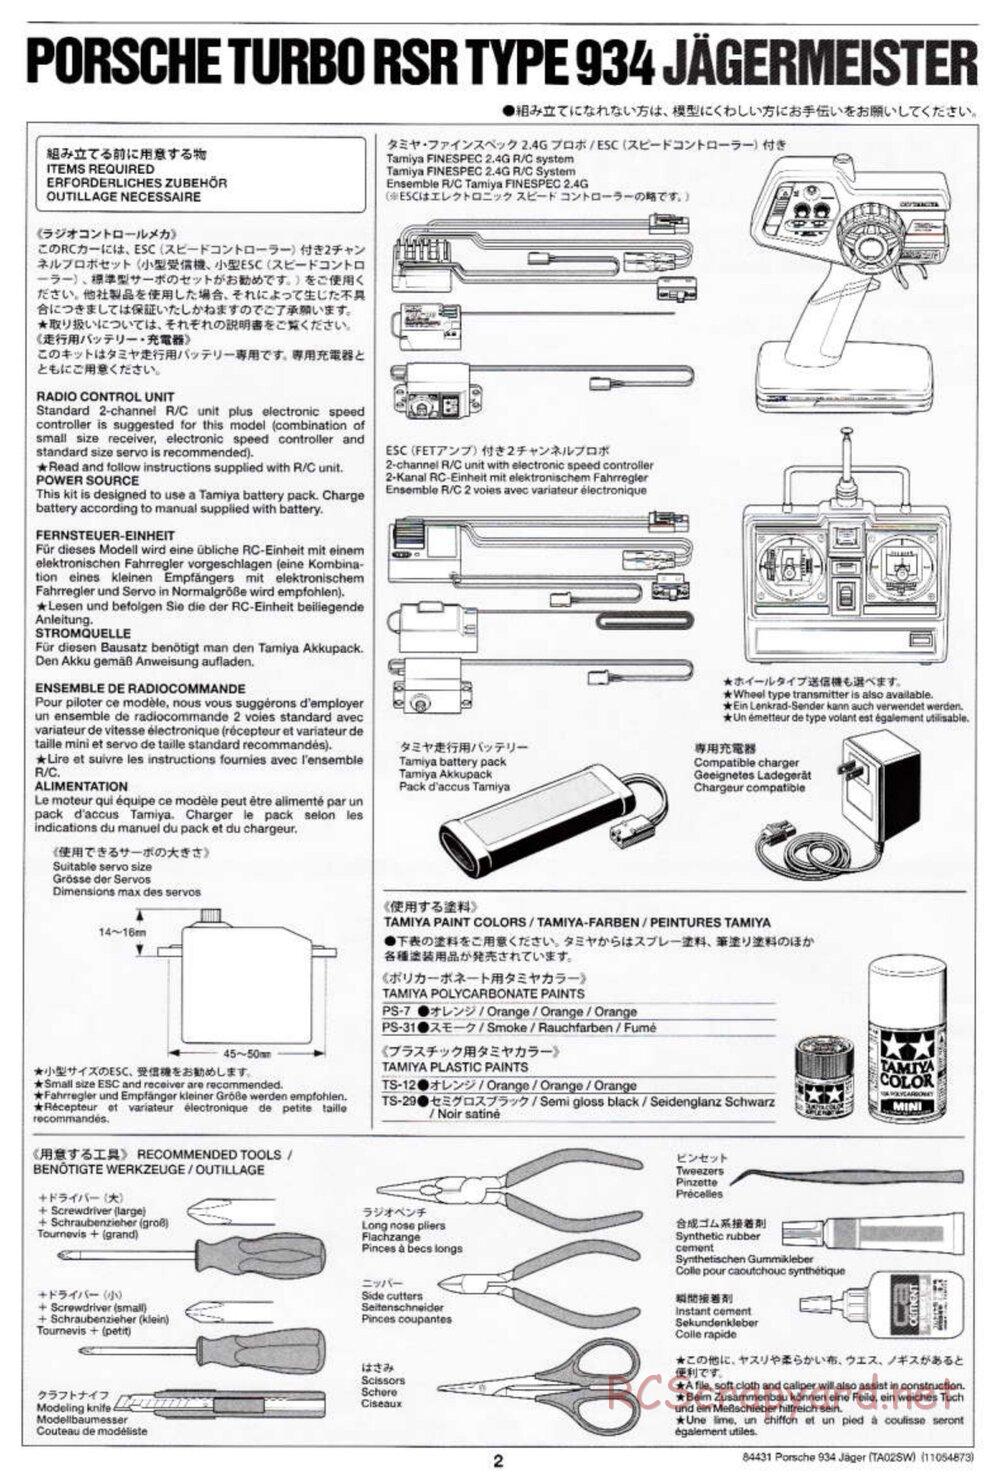 Tamiya - Porsche Turbo RSR Type 934 Jagermeister - TA-02SW Chassis - Manual - Page 2